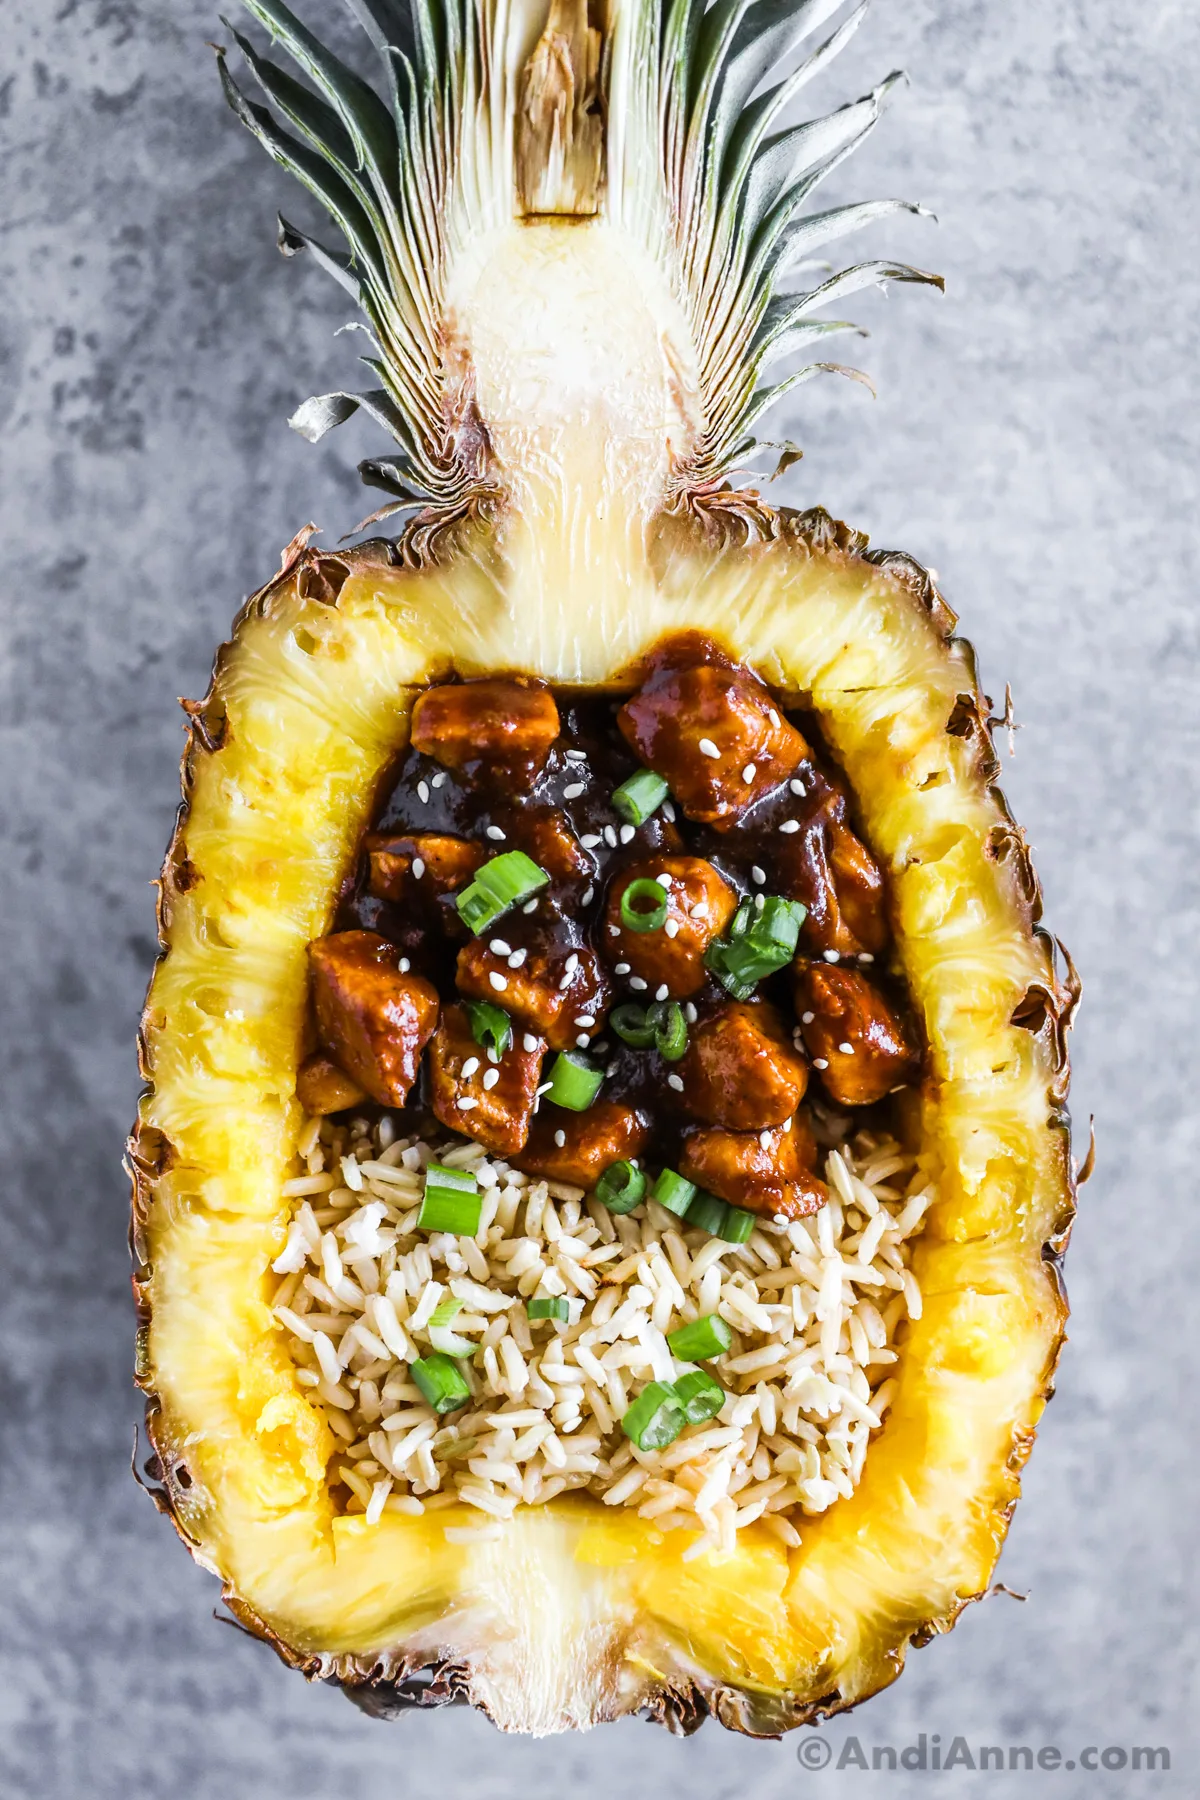 A pineapple boat with rice, teriyaki chicken bites, sprinkled with green onion and sesame seeds.